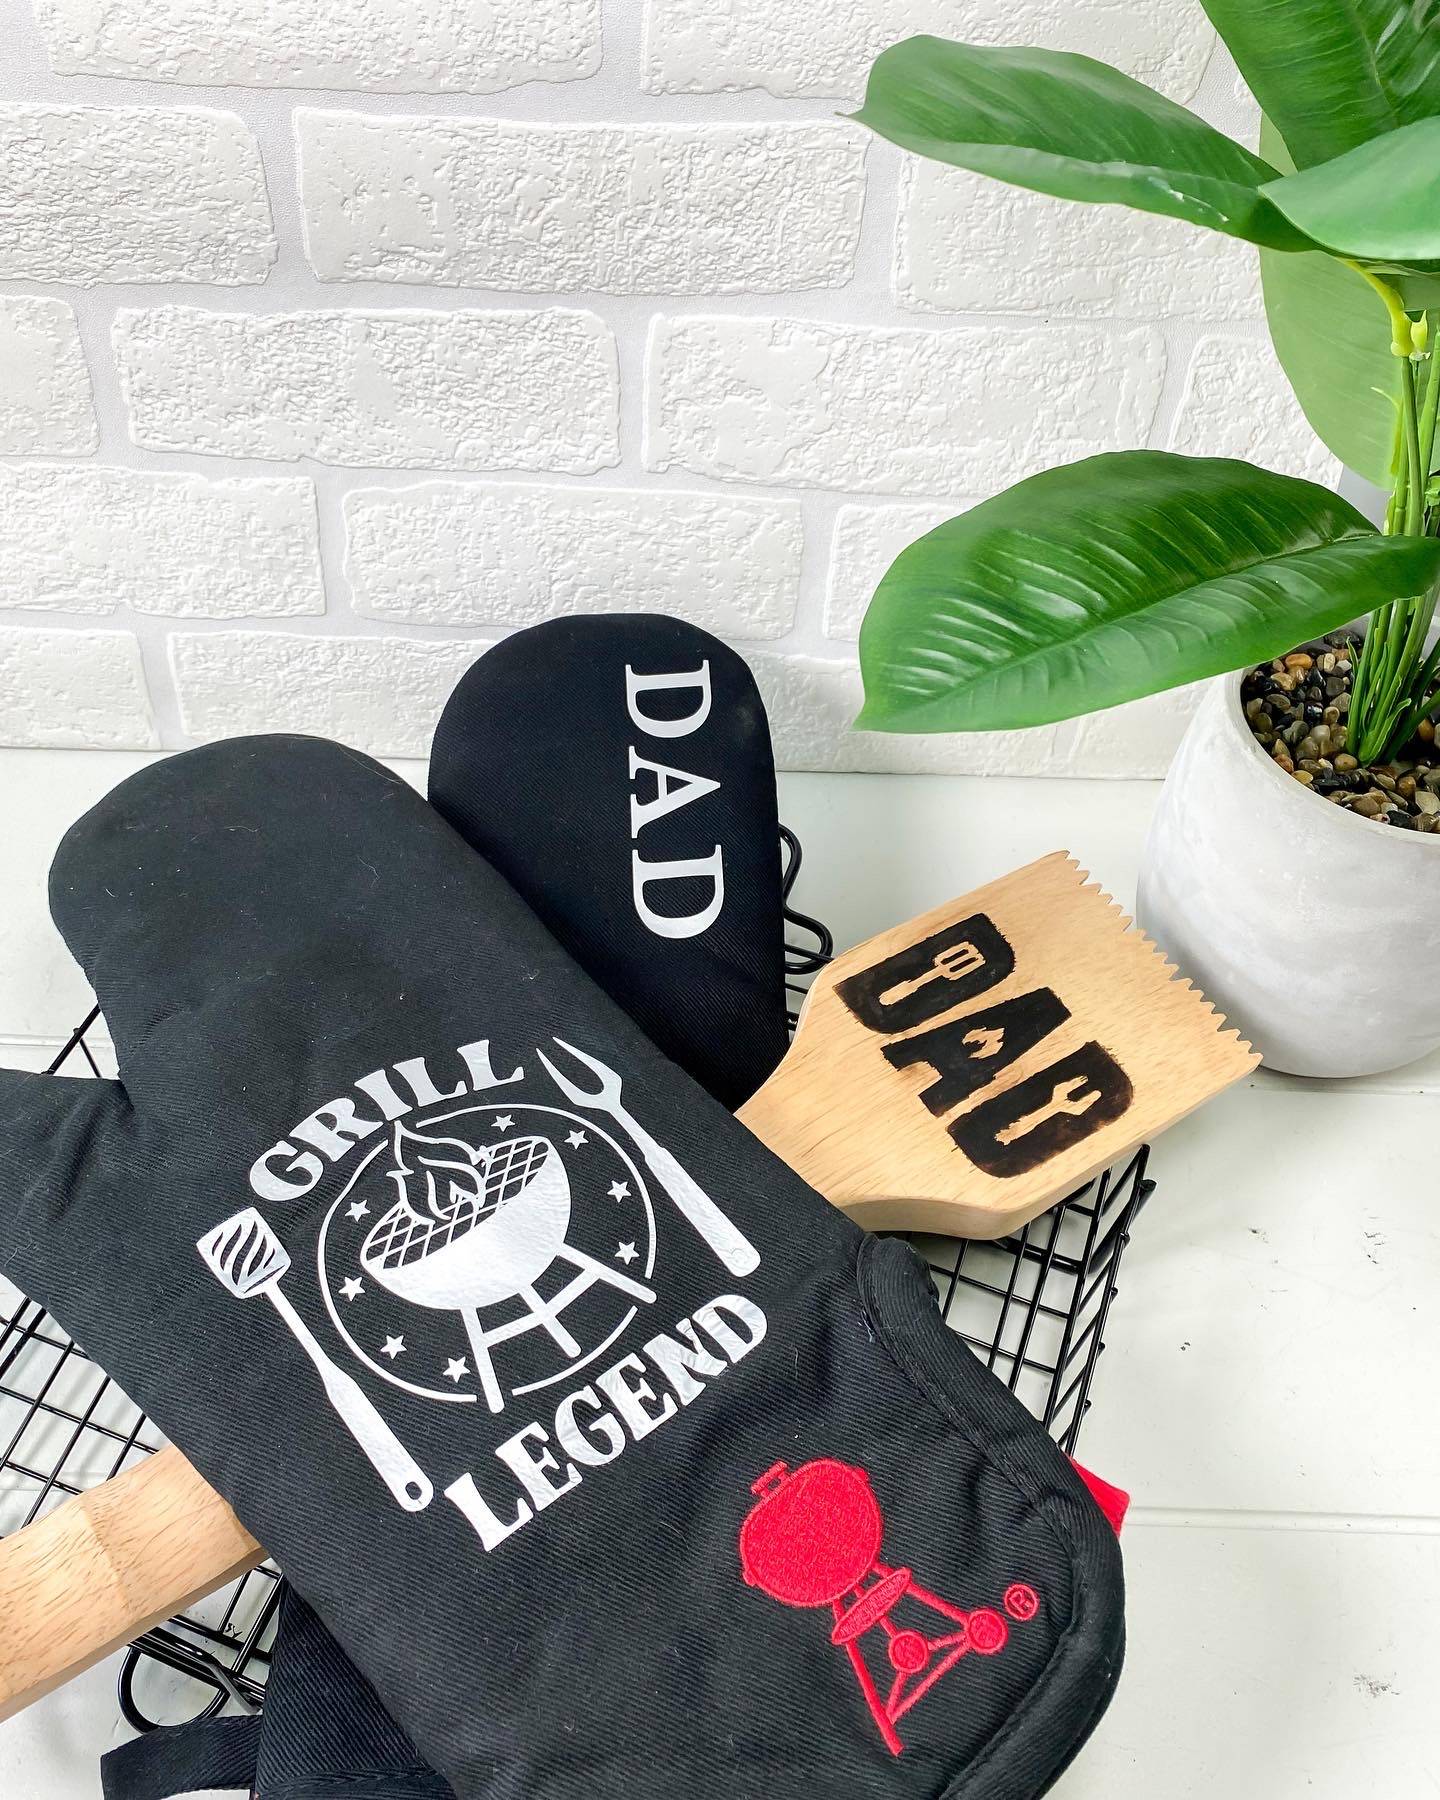 black oven mitts dad father's day gift idea wood bbq scraper white brick background plant wire basket